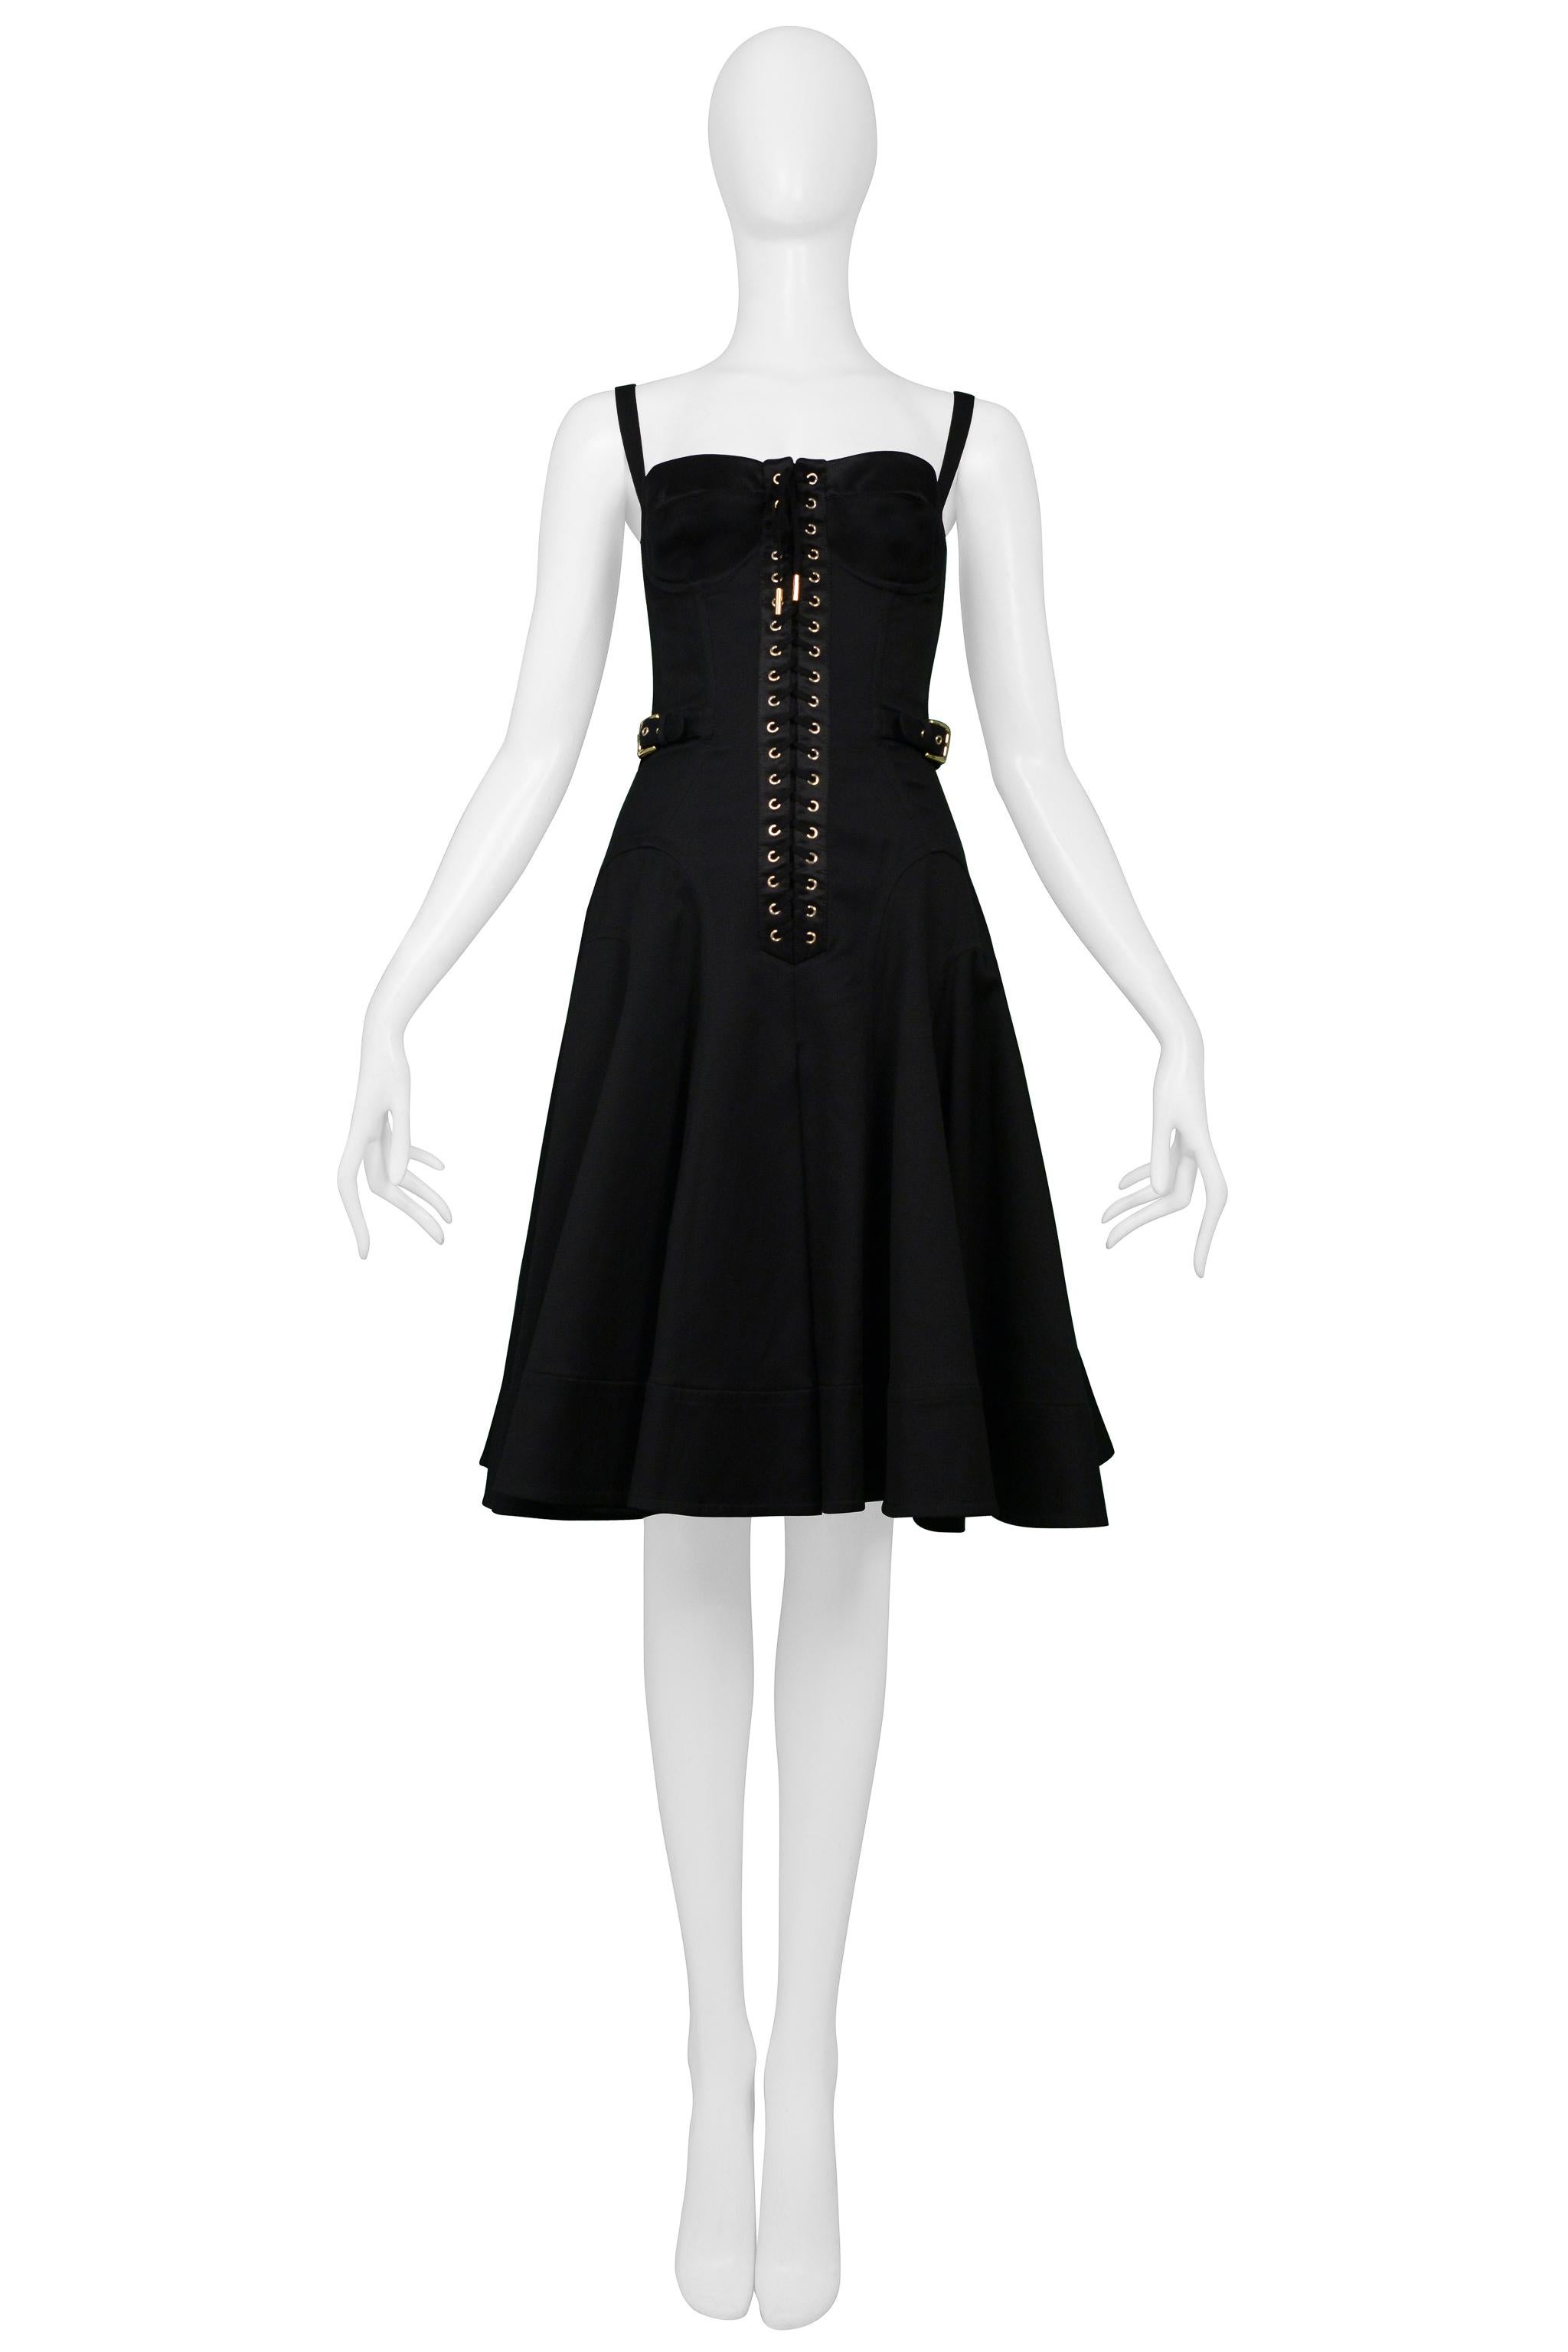 Resurrection Vintage is excited to offer a vintage Dolce & Gabbana black sundress dress featuring a front corset panel with laces, bra cups, classic straps, gold adjustable buckles at the sides, a center back zipper, and knee-length. 

Dolce &